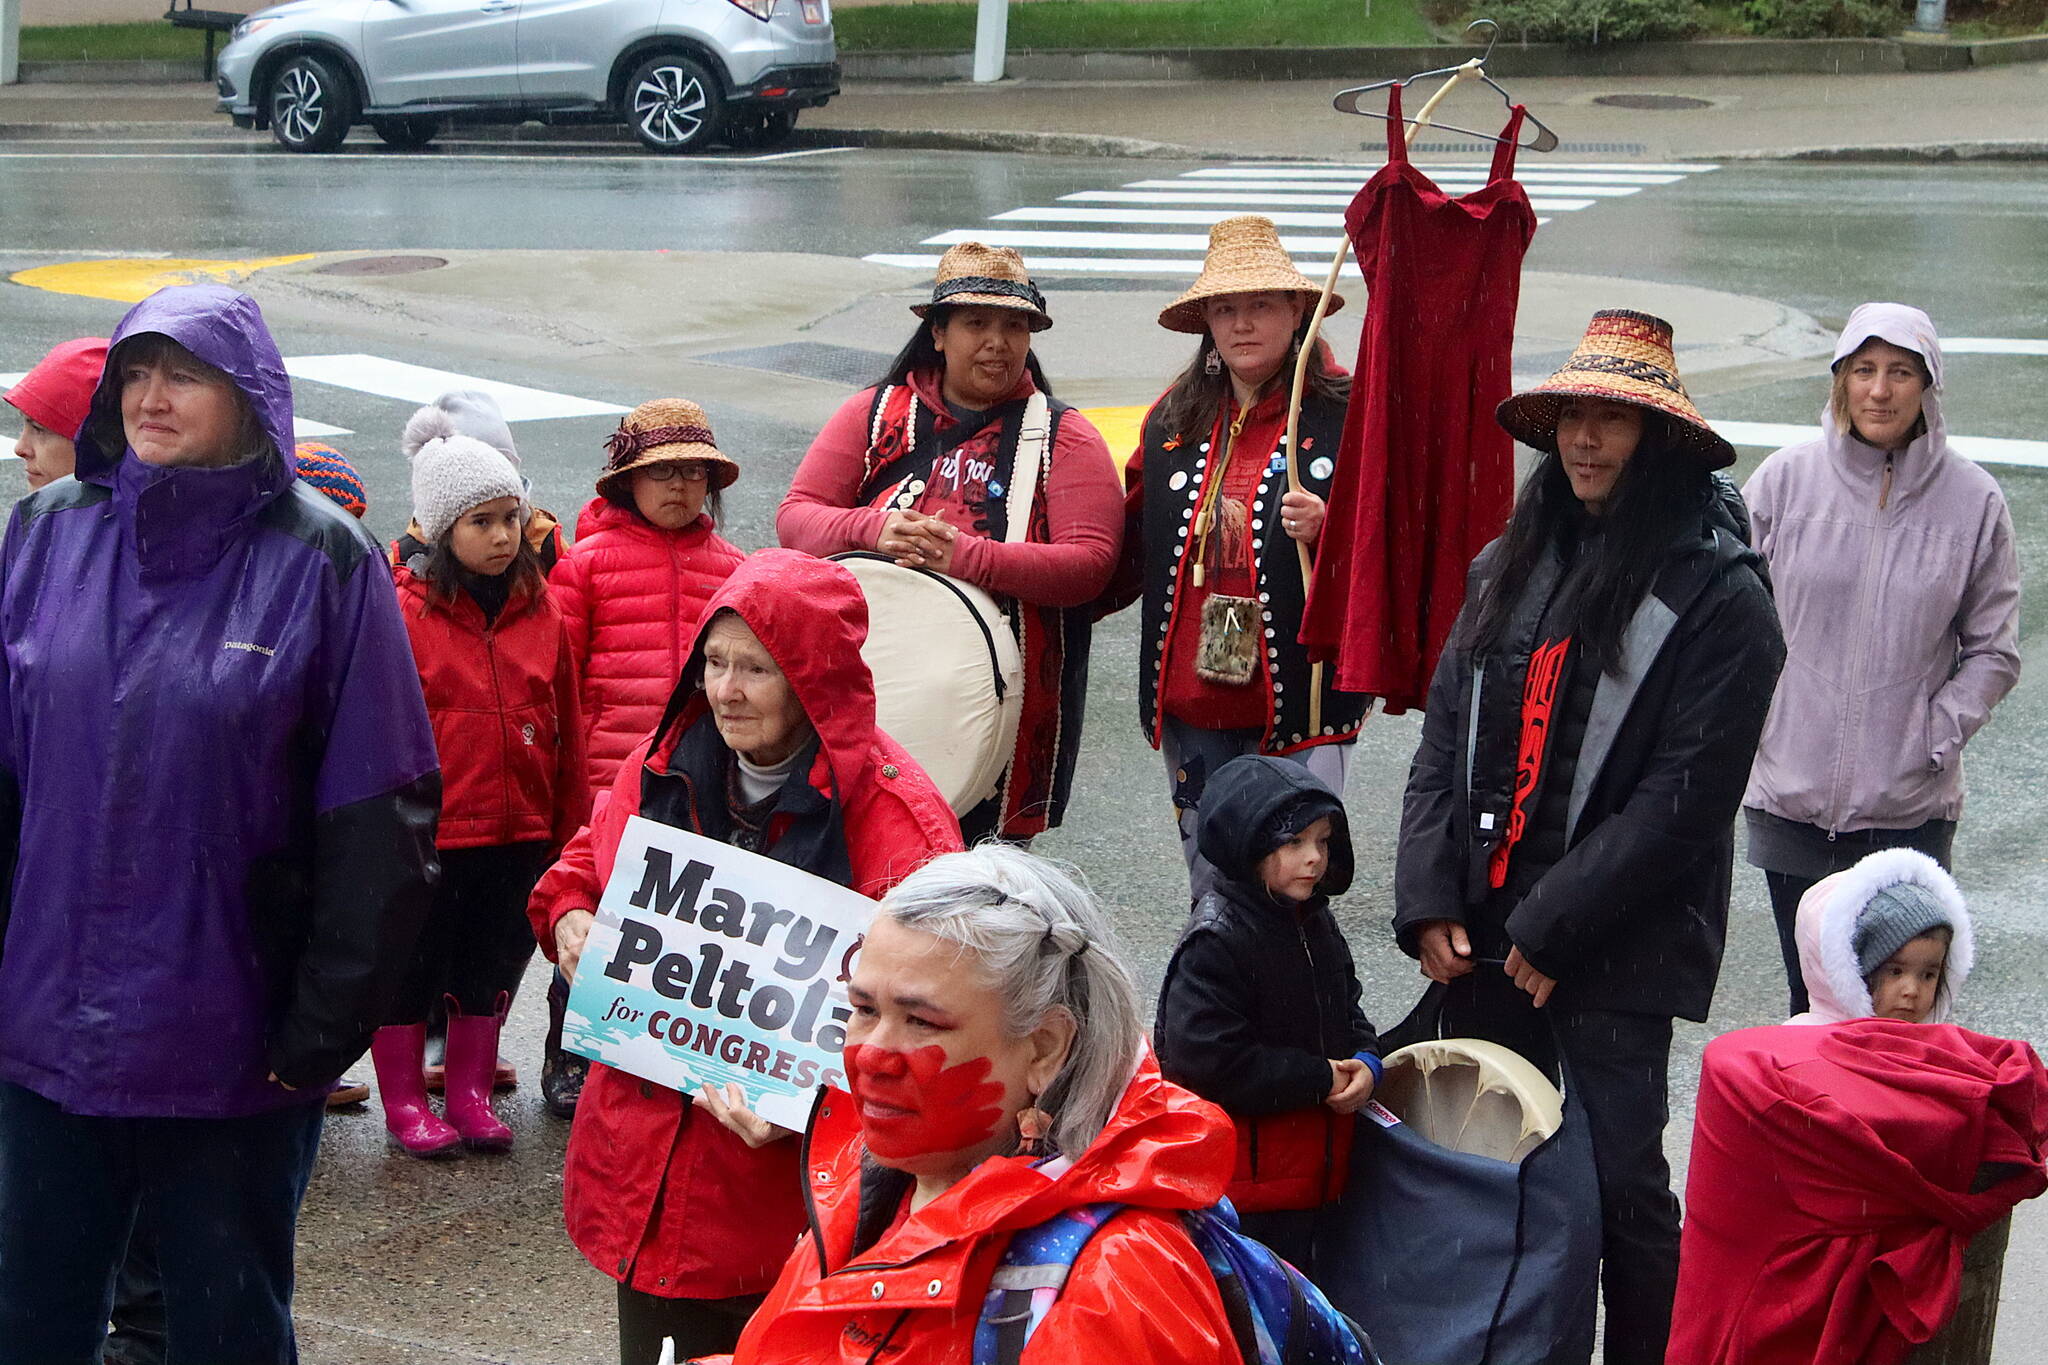 Red clothing is worn and displayed as a sign of a unified call for action during a rally in front of the Alaska State Capitol on Sunday to commemorate the annual Missing and Murdered Indigenous Persons Awareness Day. (Mark Sabbatini / Juneau Empire)